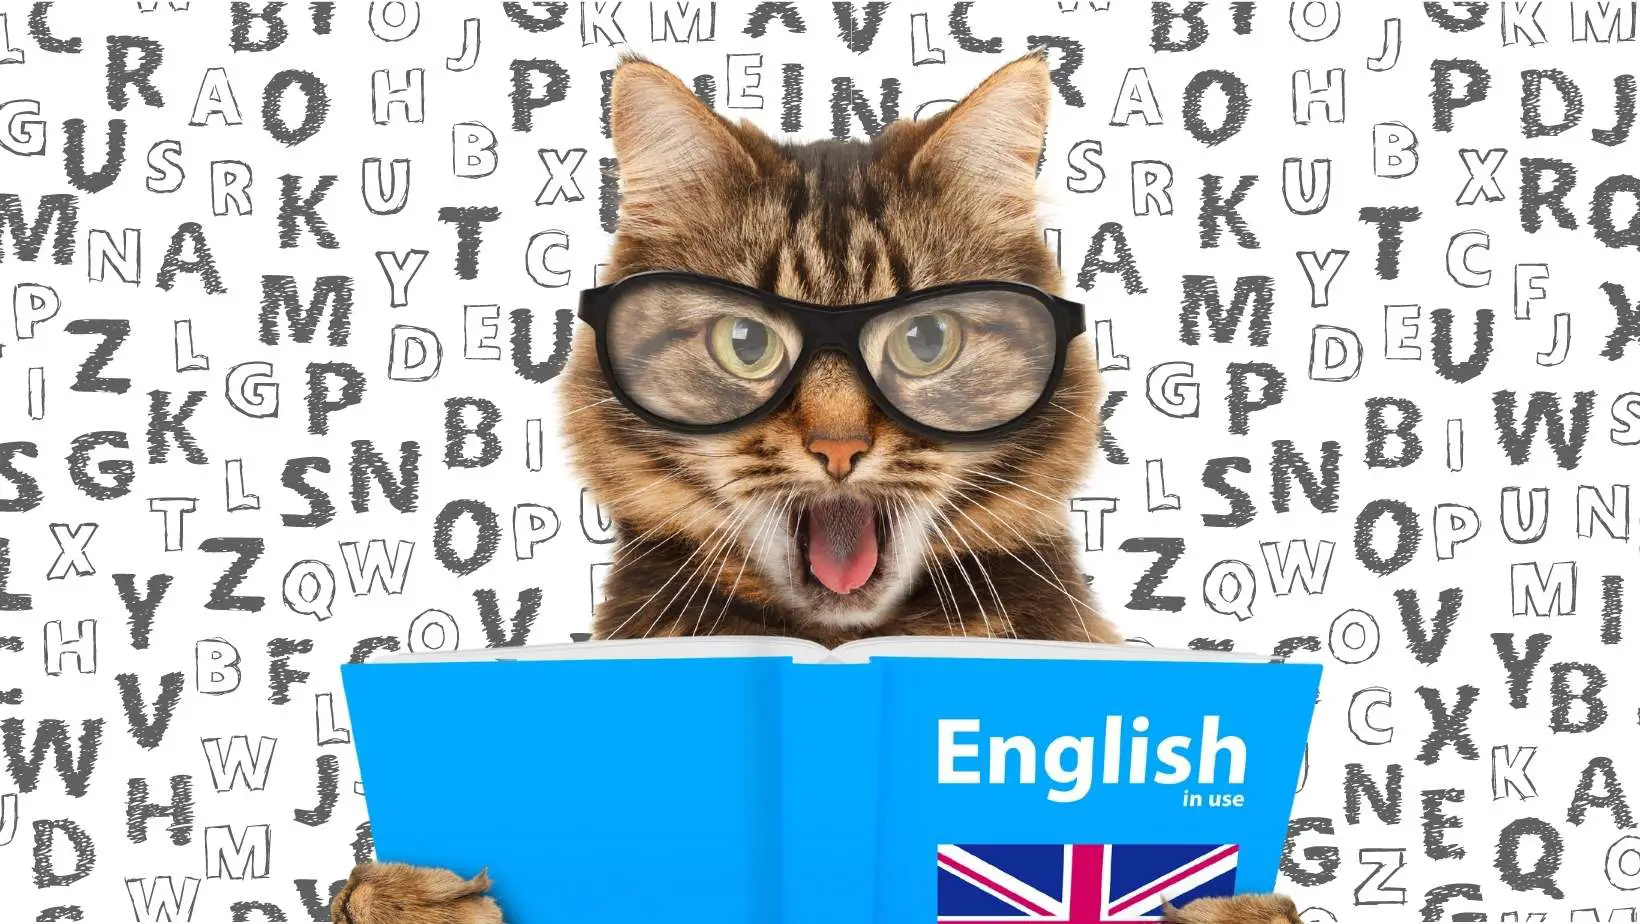 Do Cats Understand English?